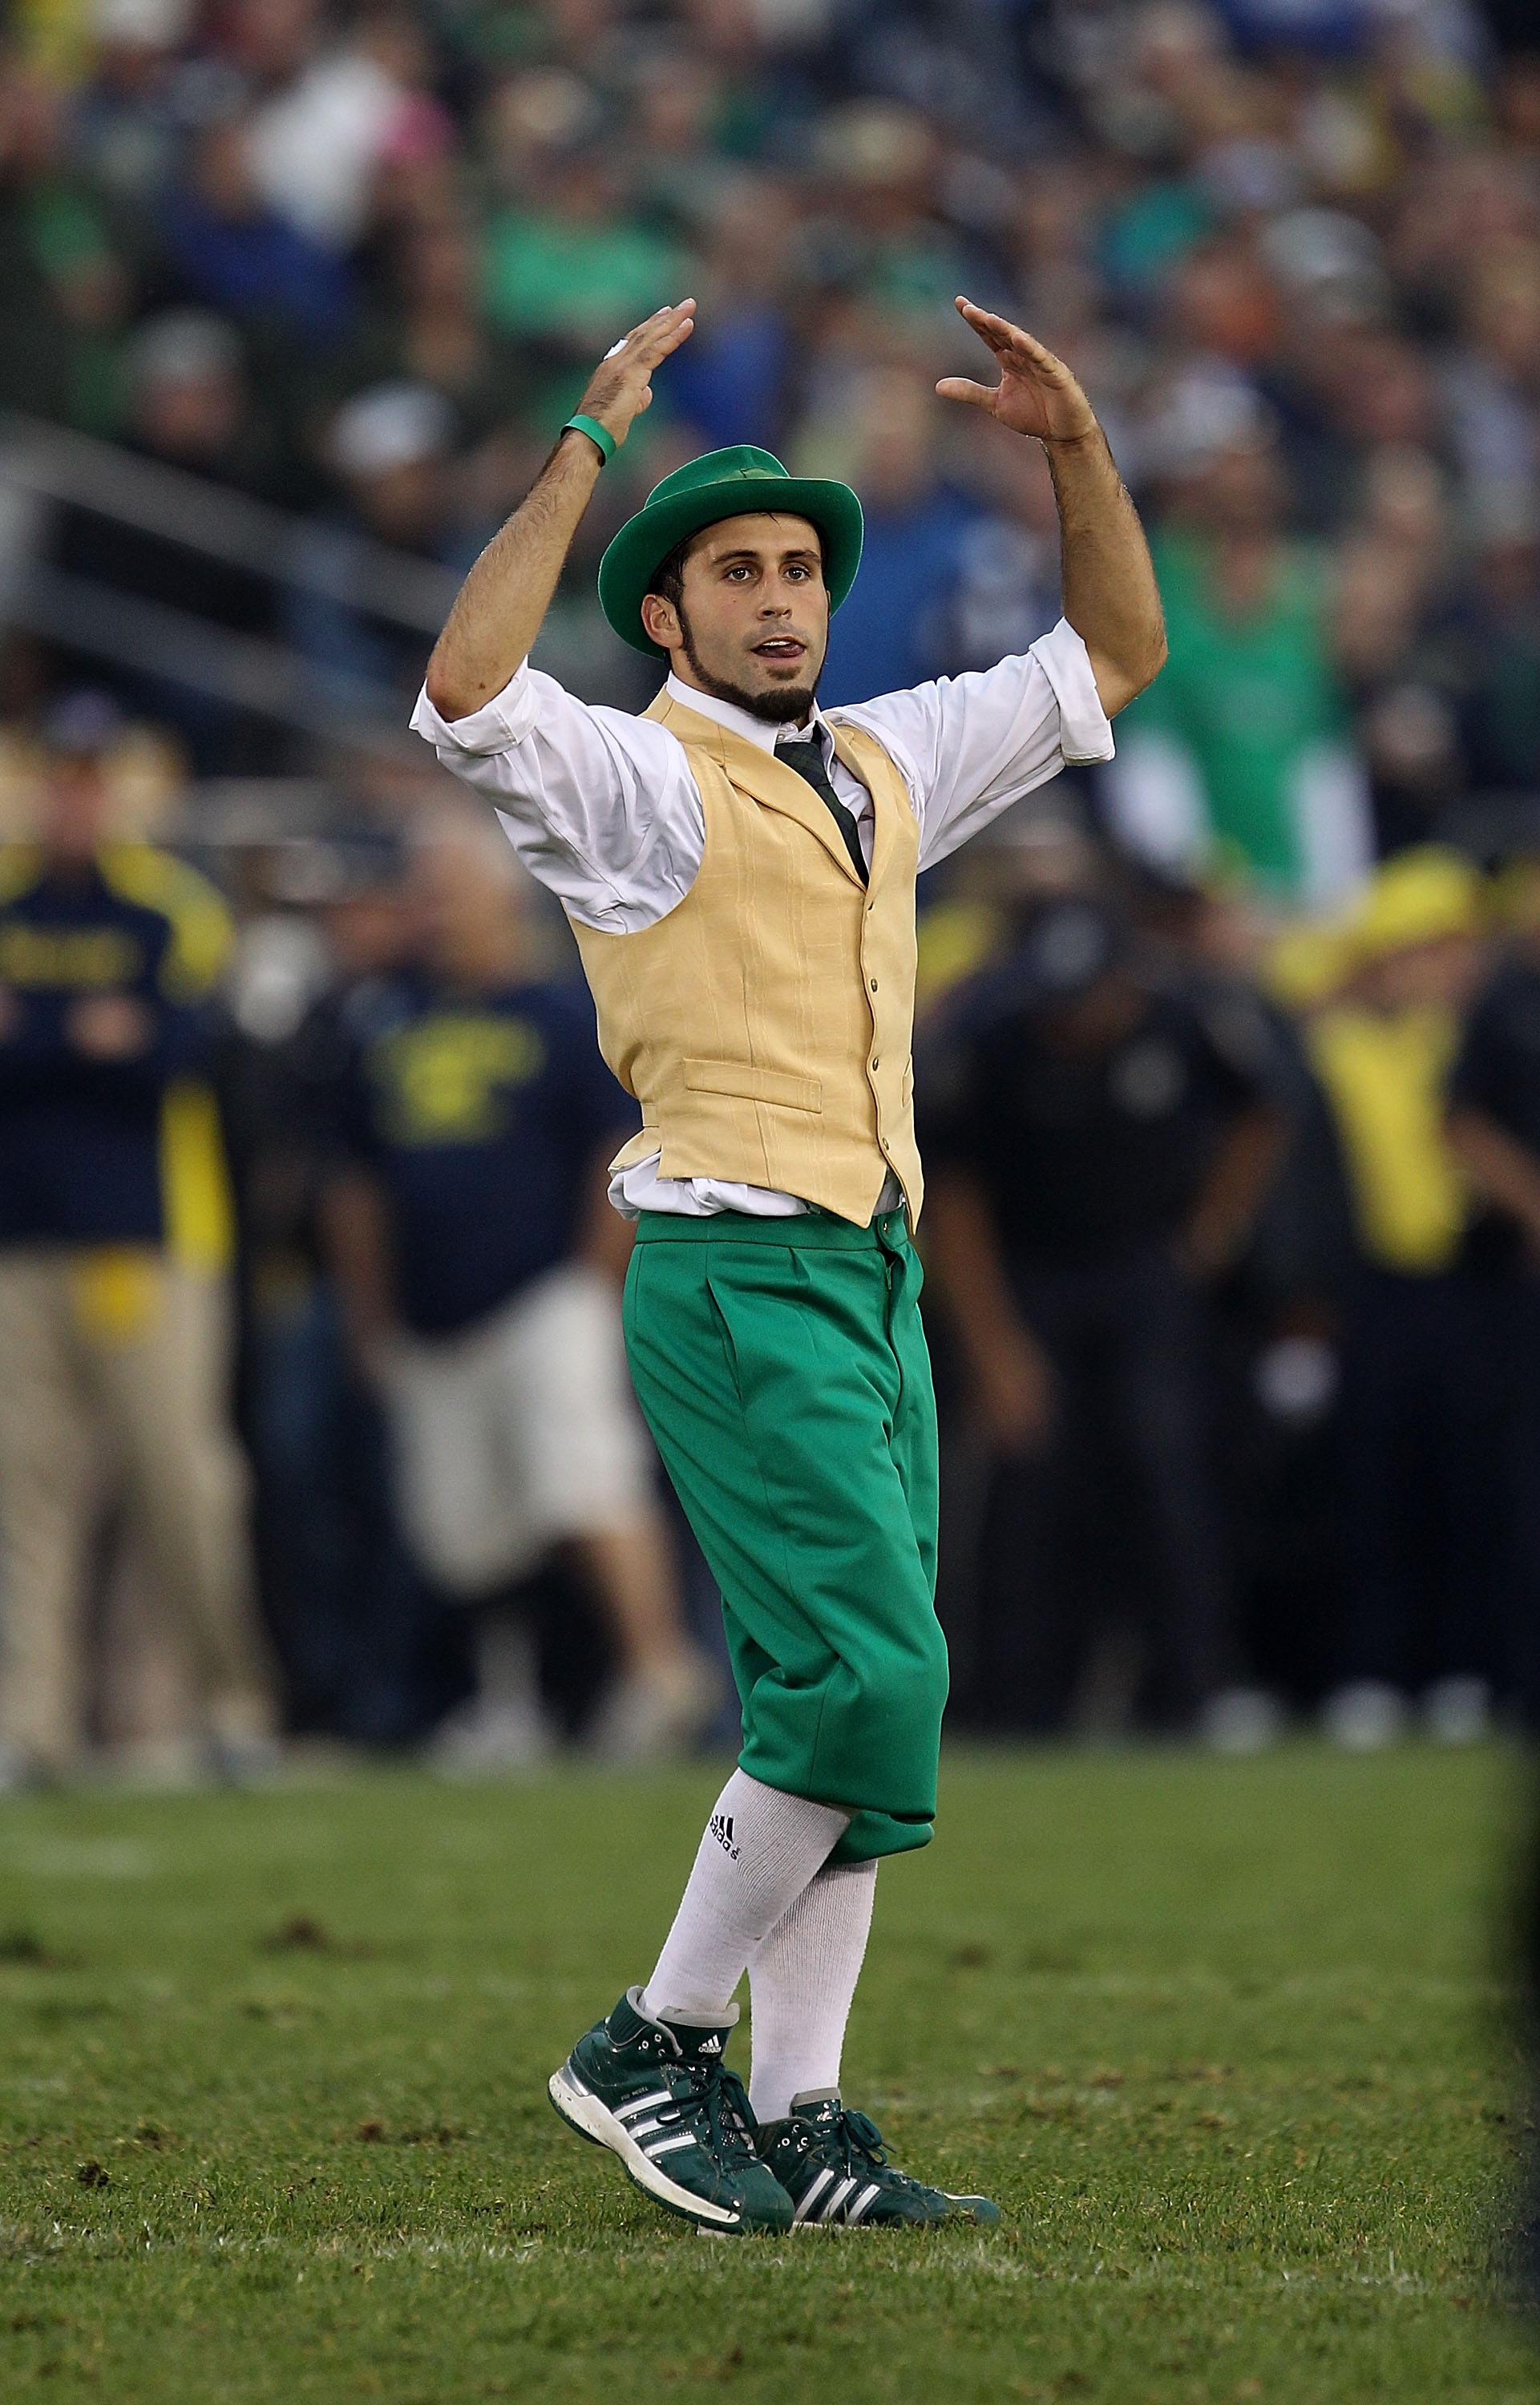 SOUTH BEND, IN - SEPTEMBER 11: The leprechaun mascot for the Notre Dame Fighting Irish performs during a game against the Michigan Wolverines at Notre Dame Stadium on September 11, 2010 in South Bend, Indiana. Michigan defeated Notre Dame 28-24. (Photo by